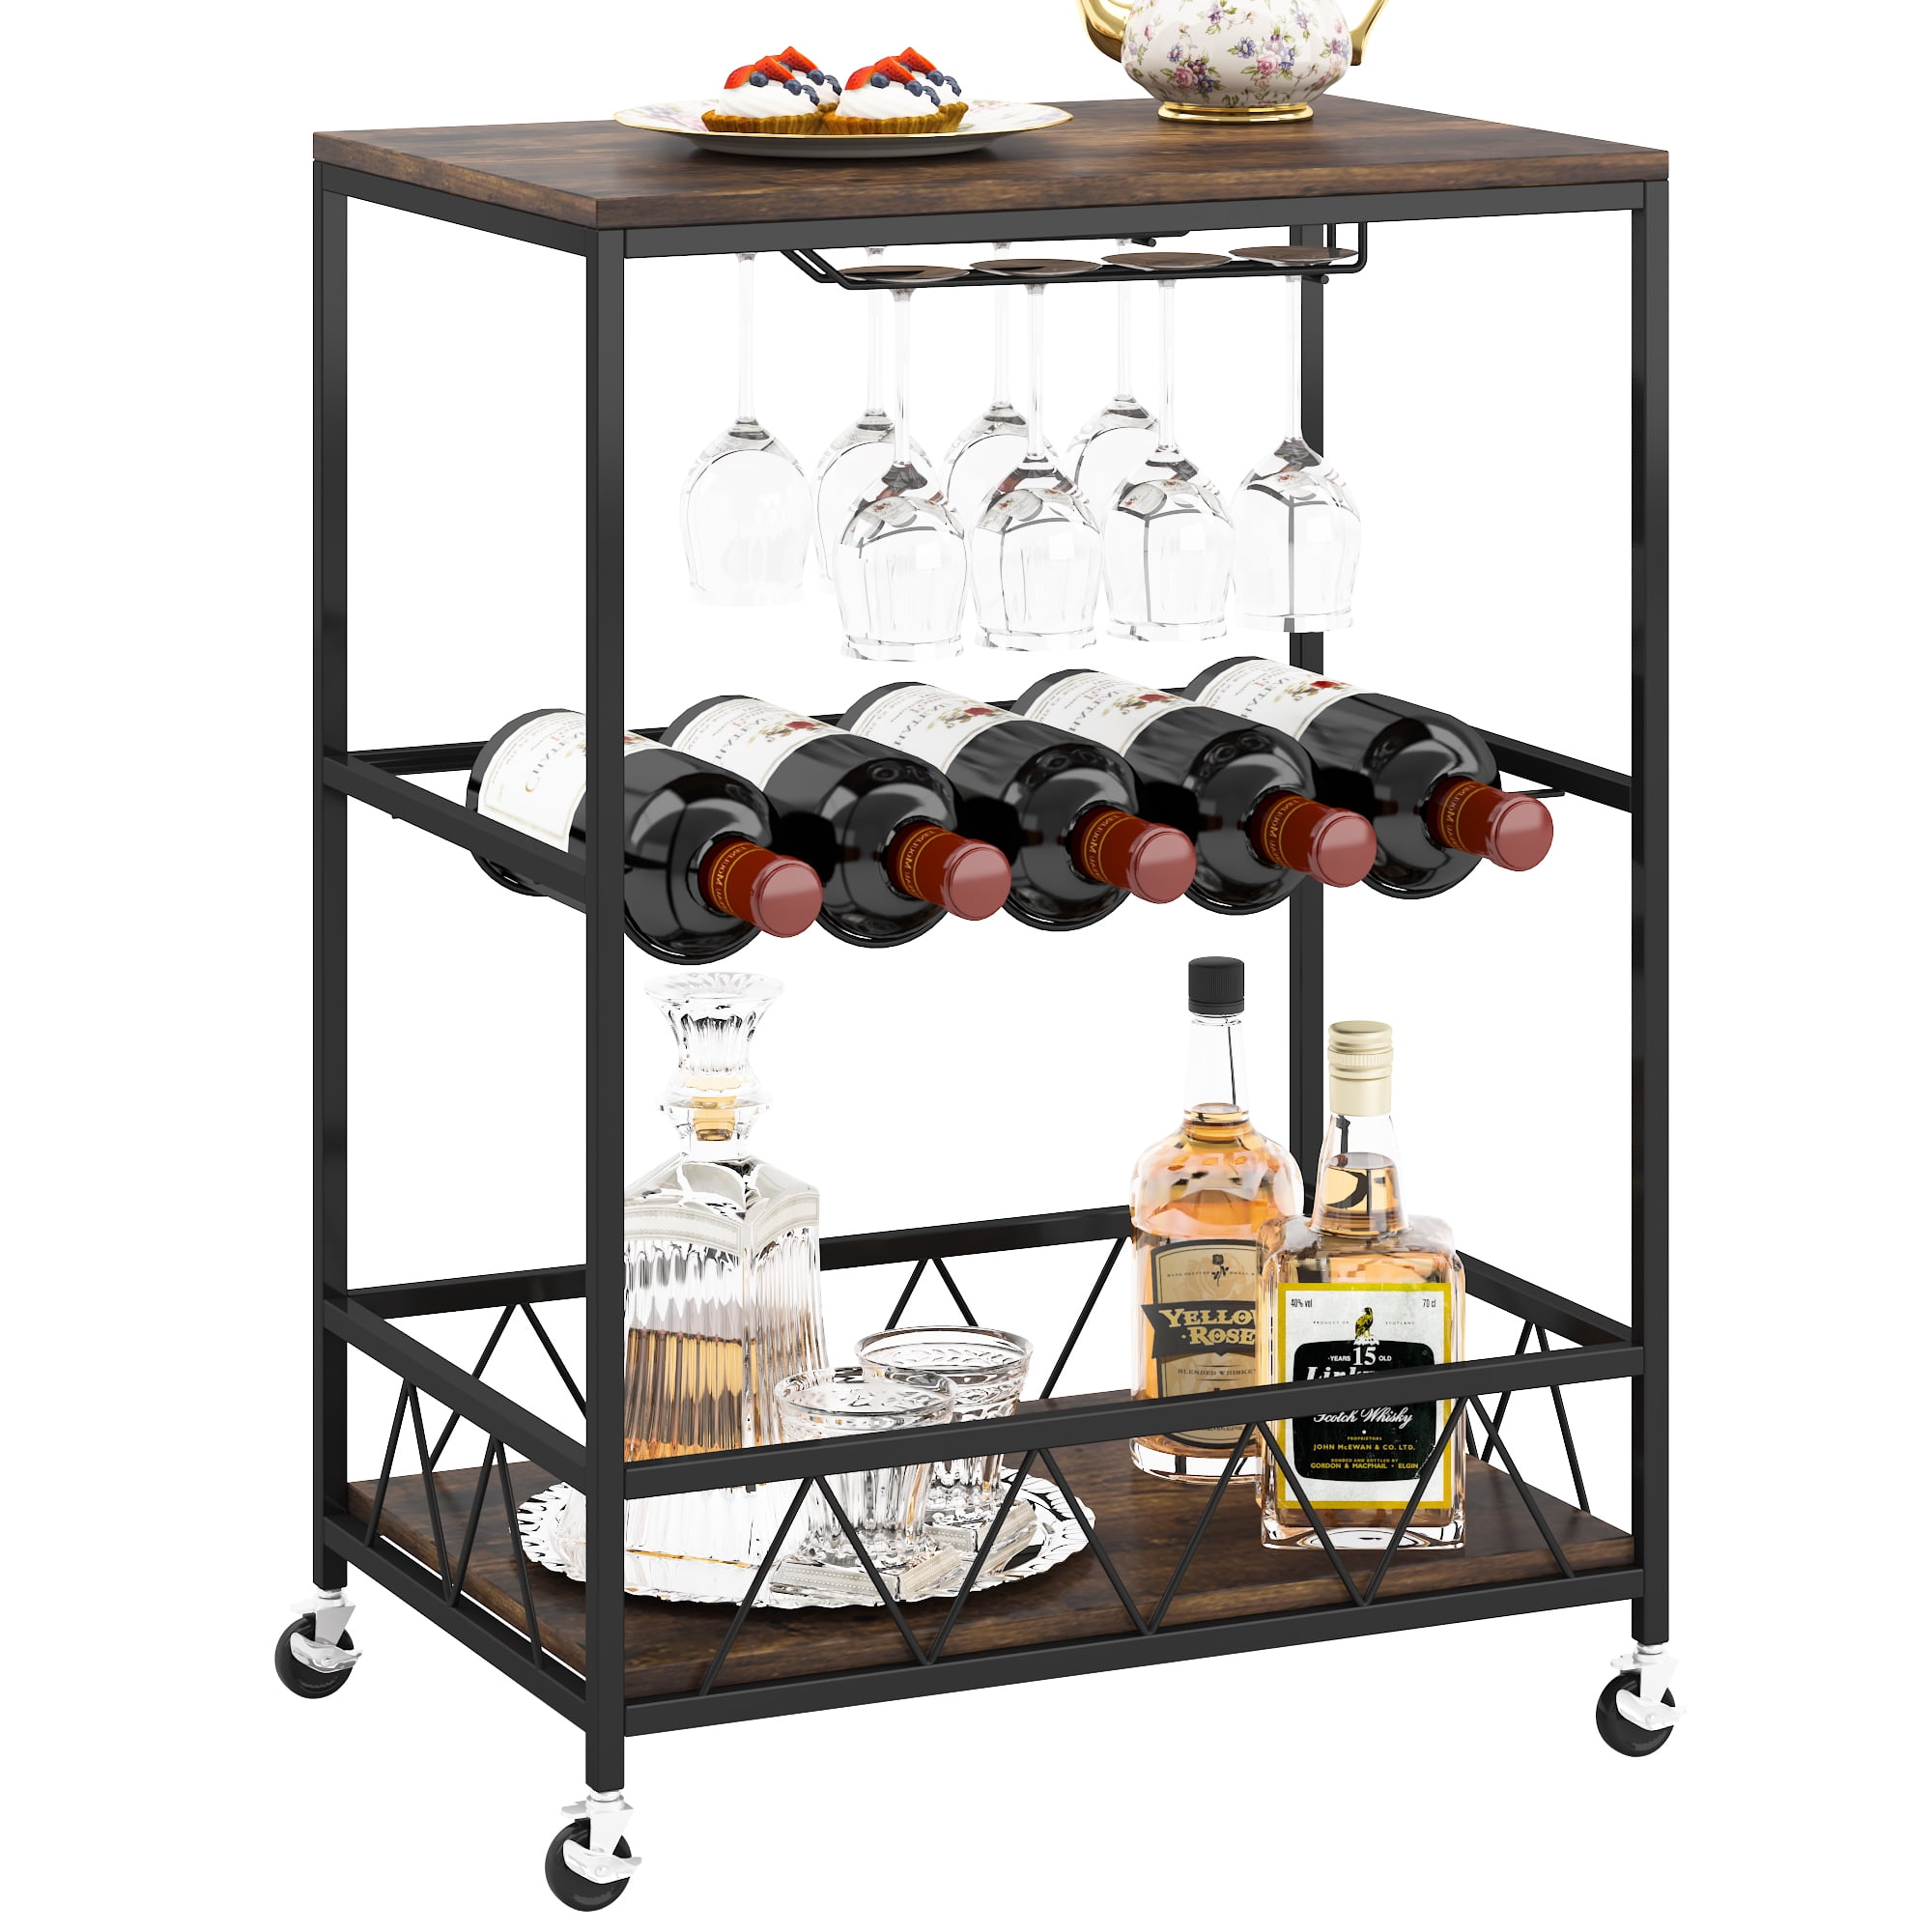 Industrial Bar Carts on Wheels with Wine Rack and Glass Holder 3 Tier Serving Cart Kitchen Club Outdoor Wood Metal Bar Storage Portable Bar for Home